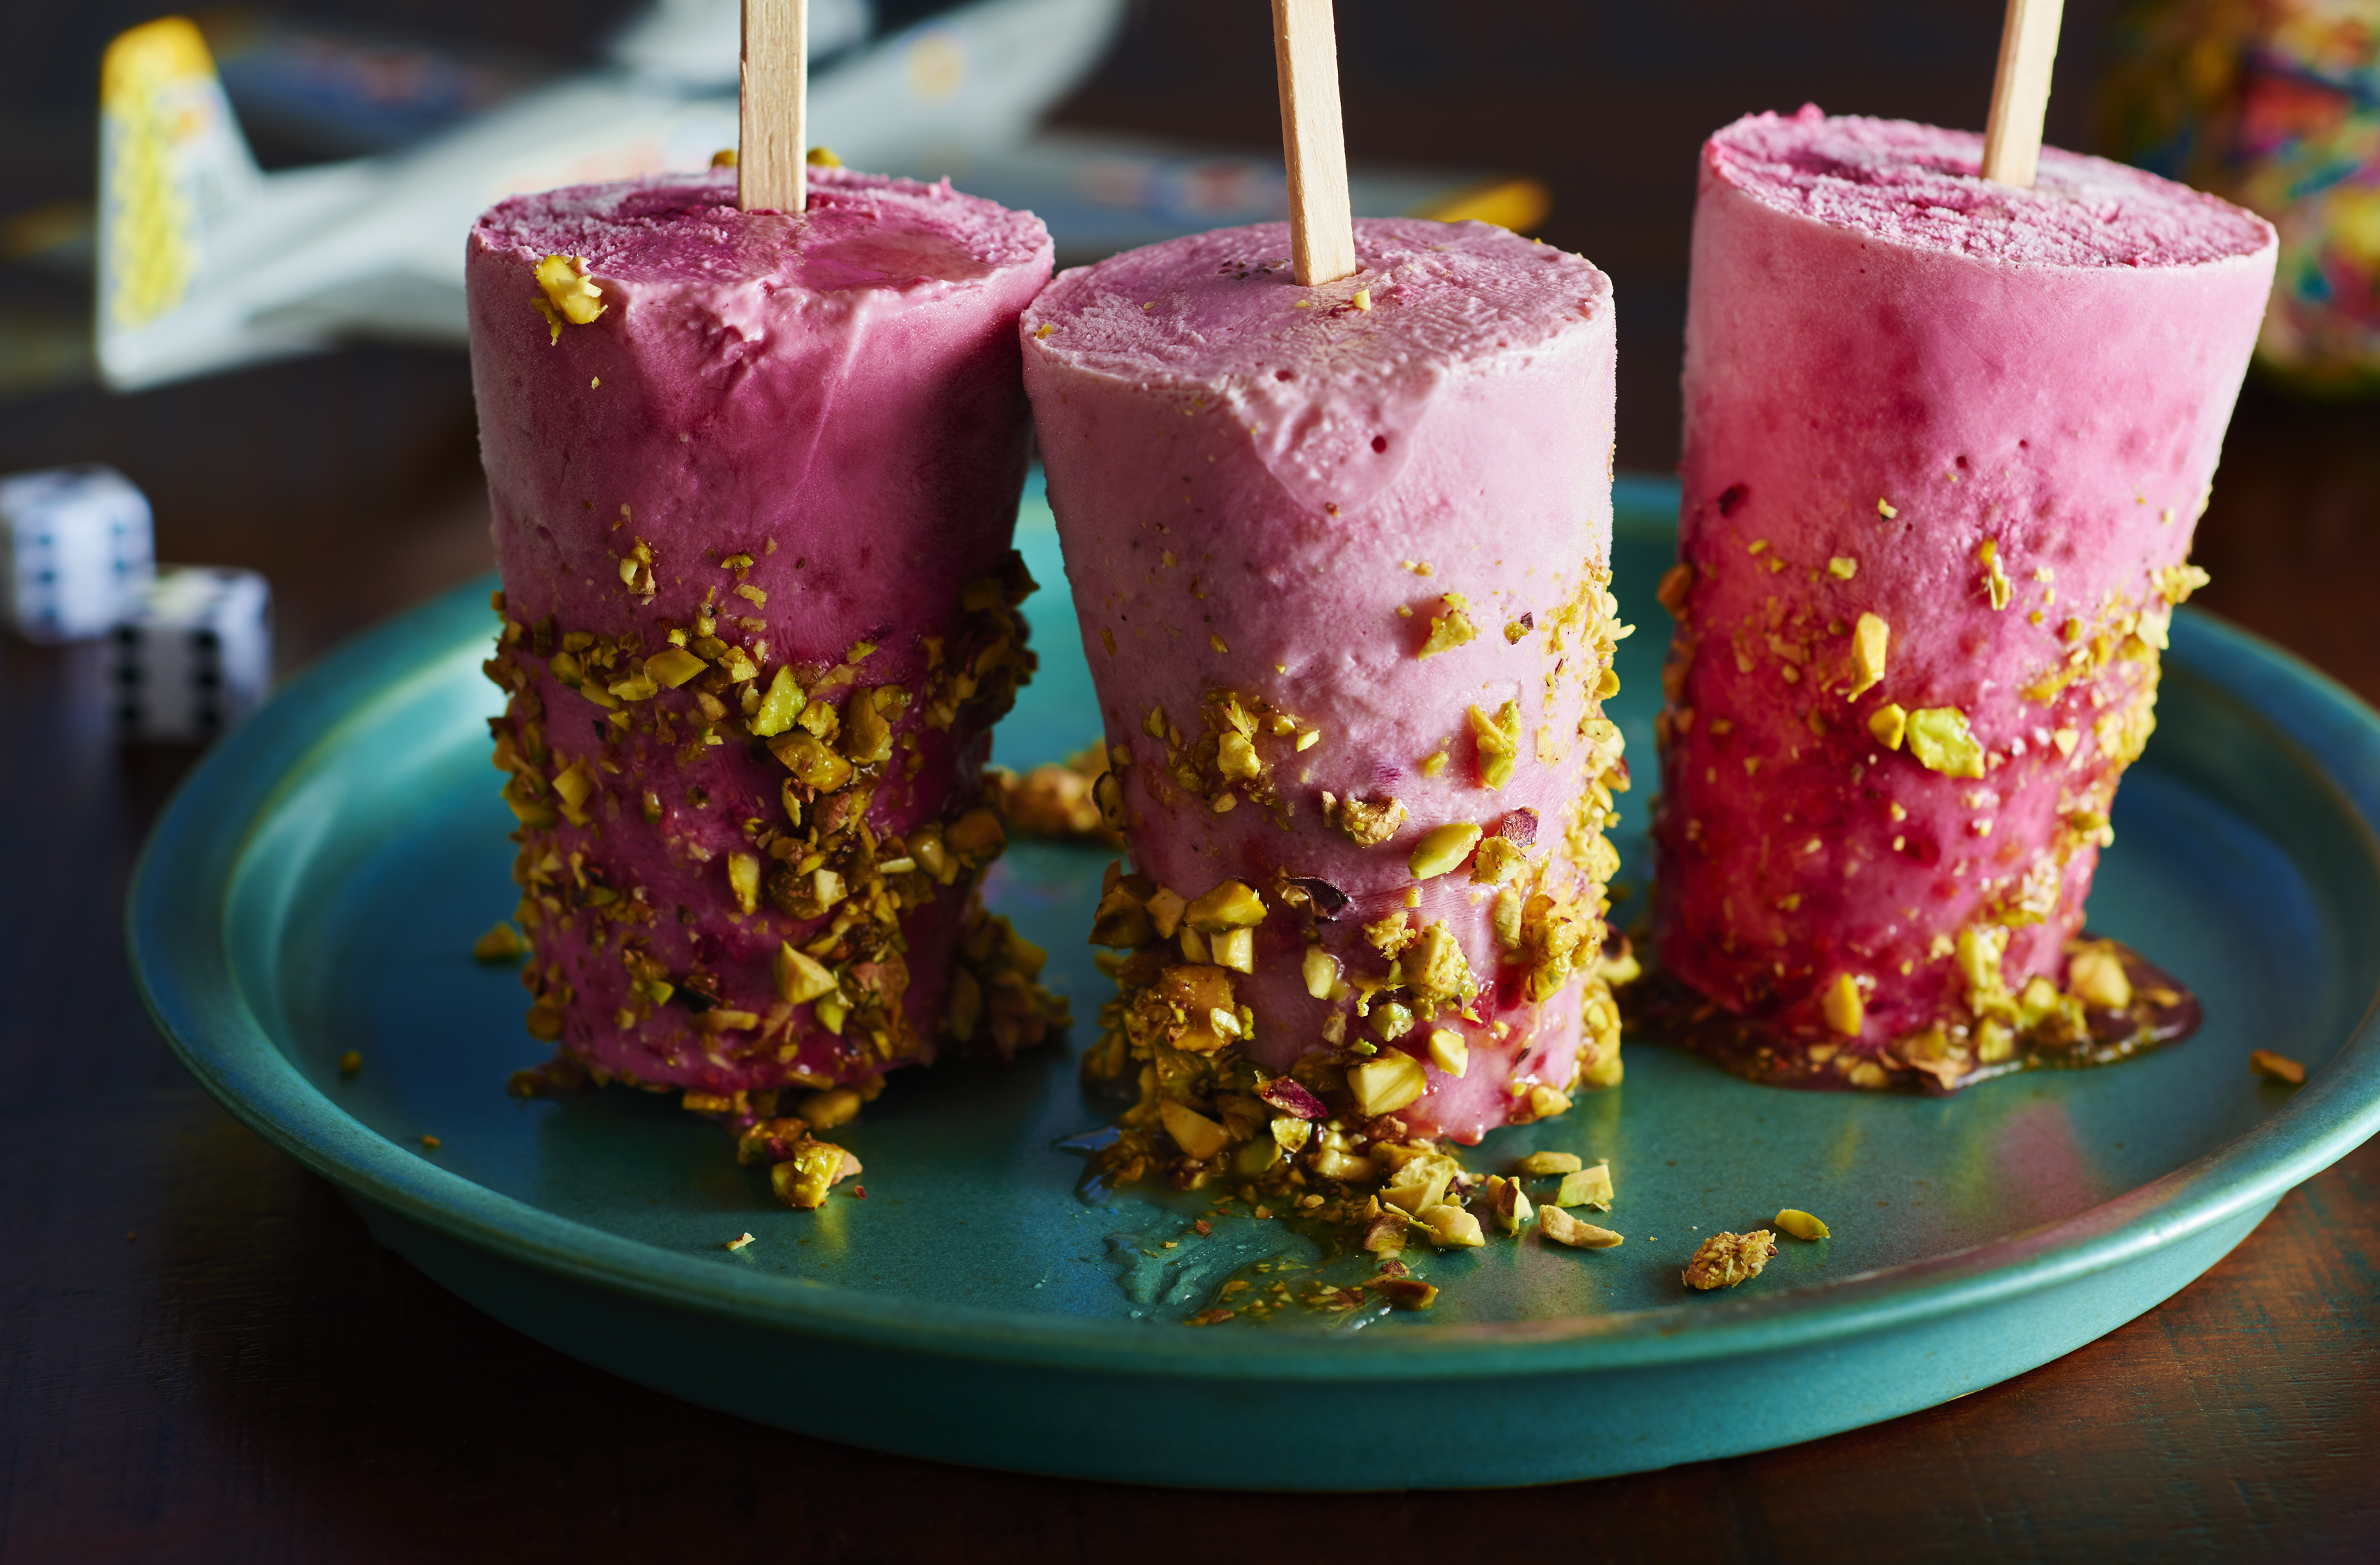 A platter of strawberry-raspberry skyr popsicles coated with pistachios
